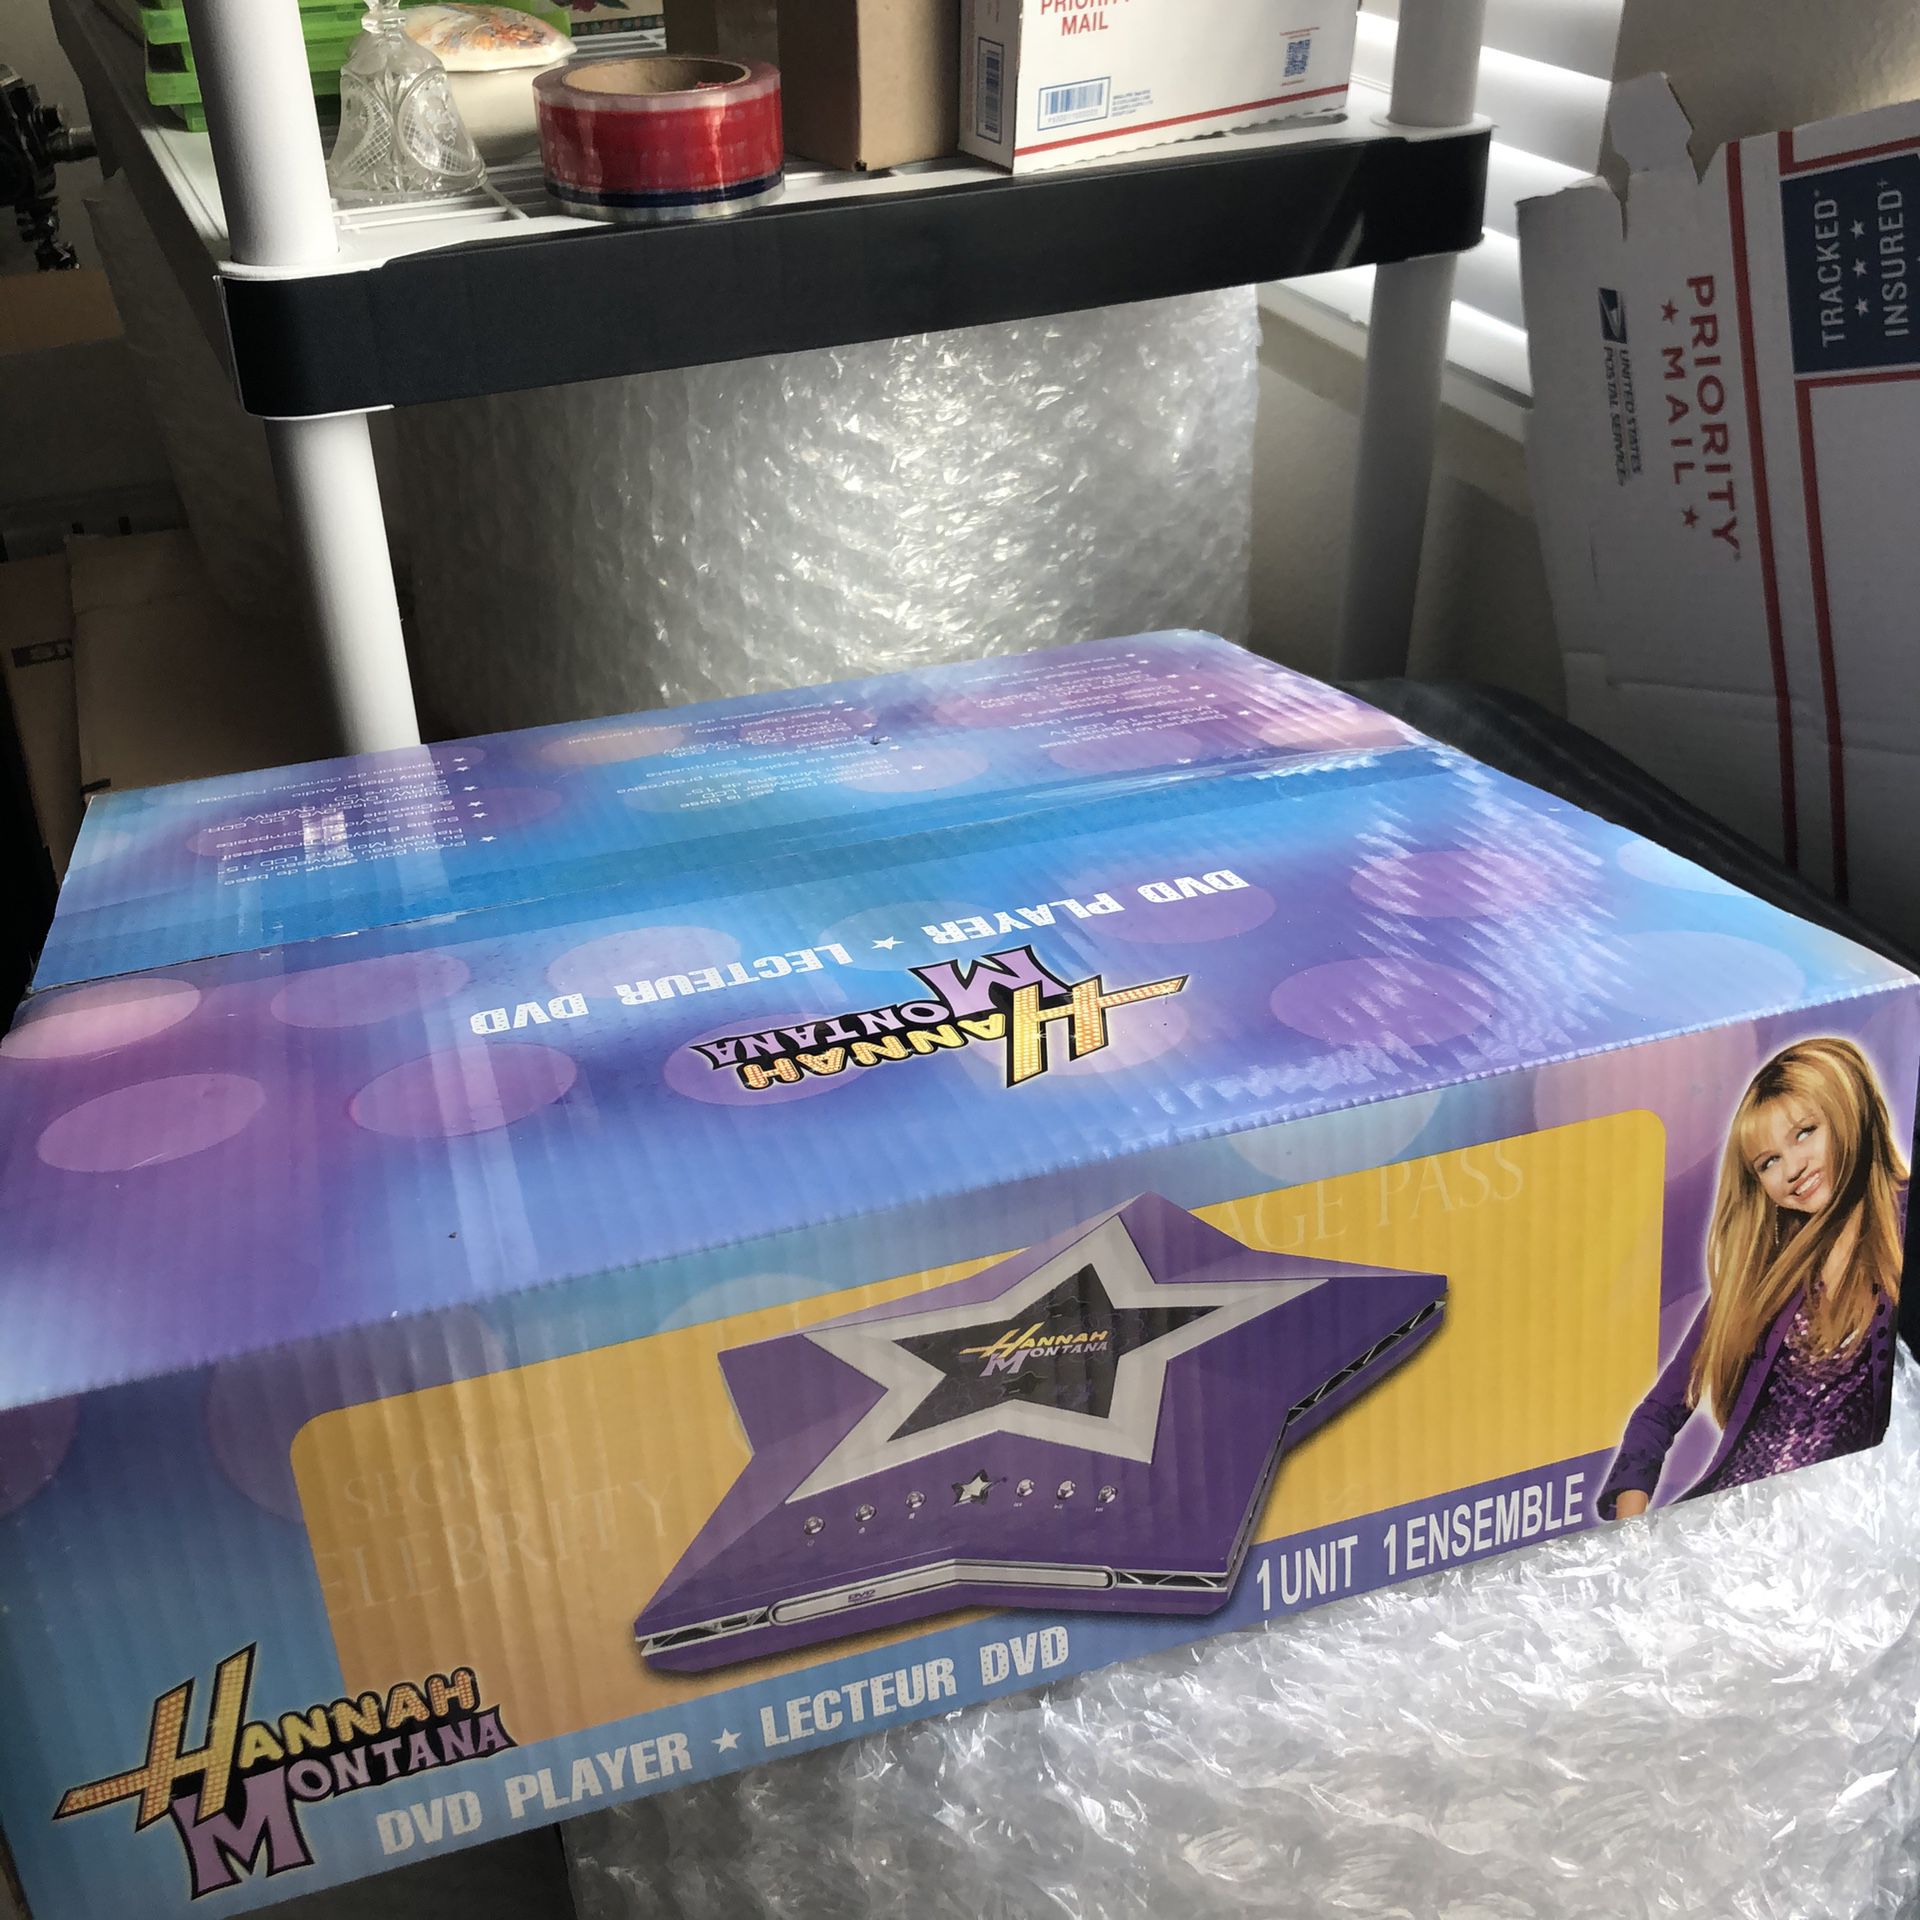 Hannah Montana Dvd Player Collectors Item, Brand New Factory Seal